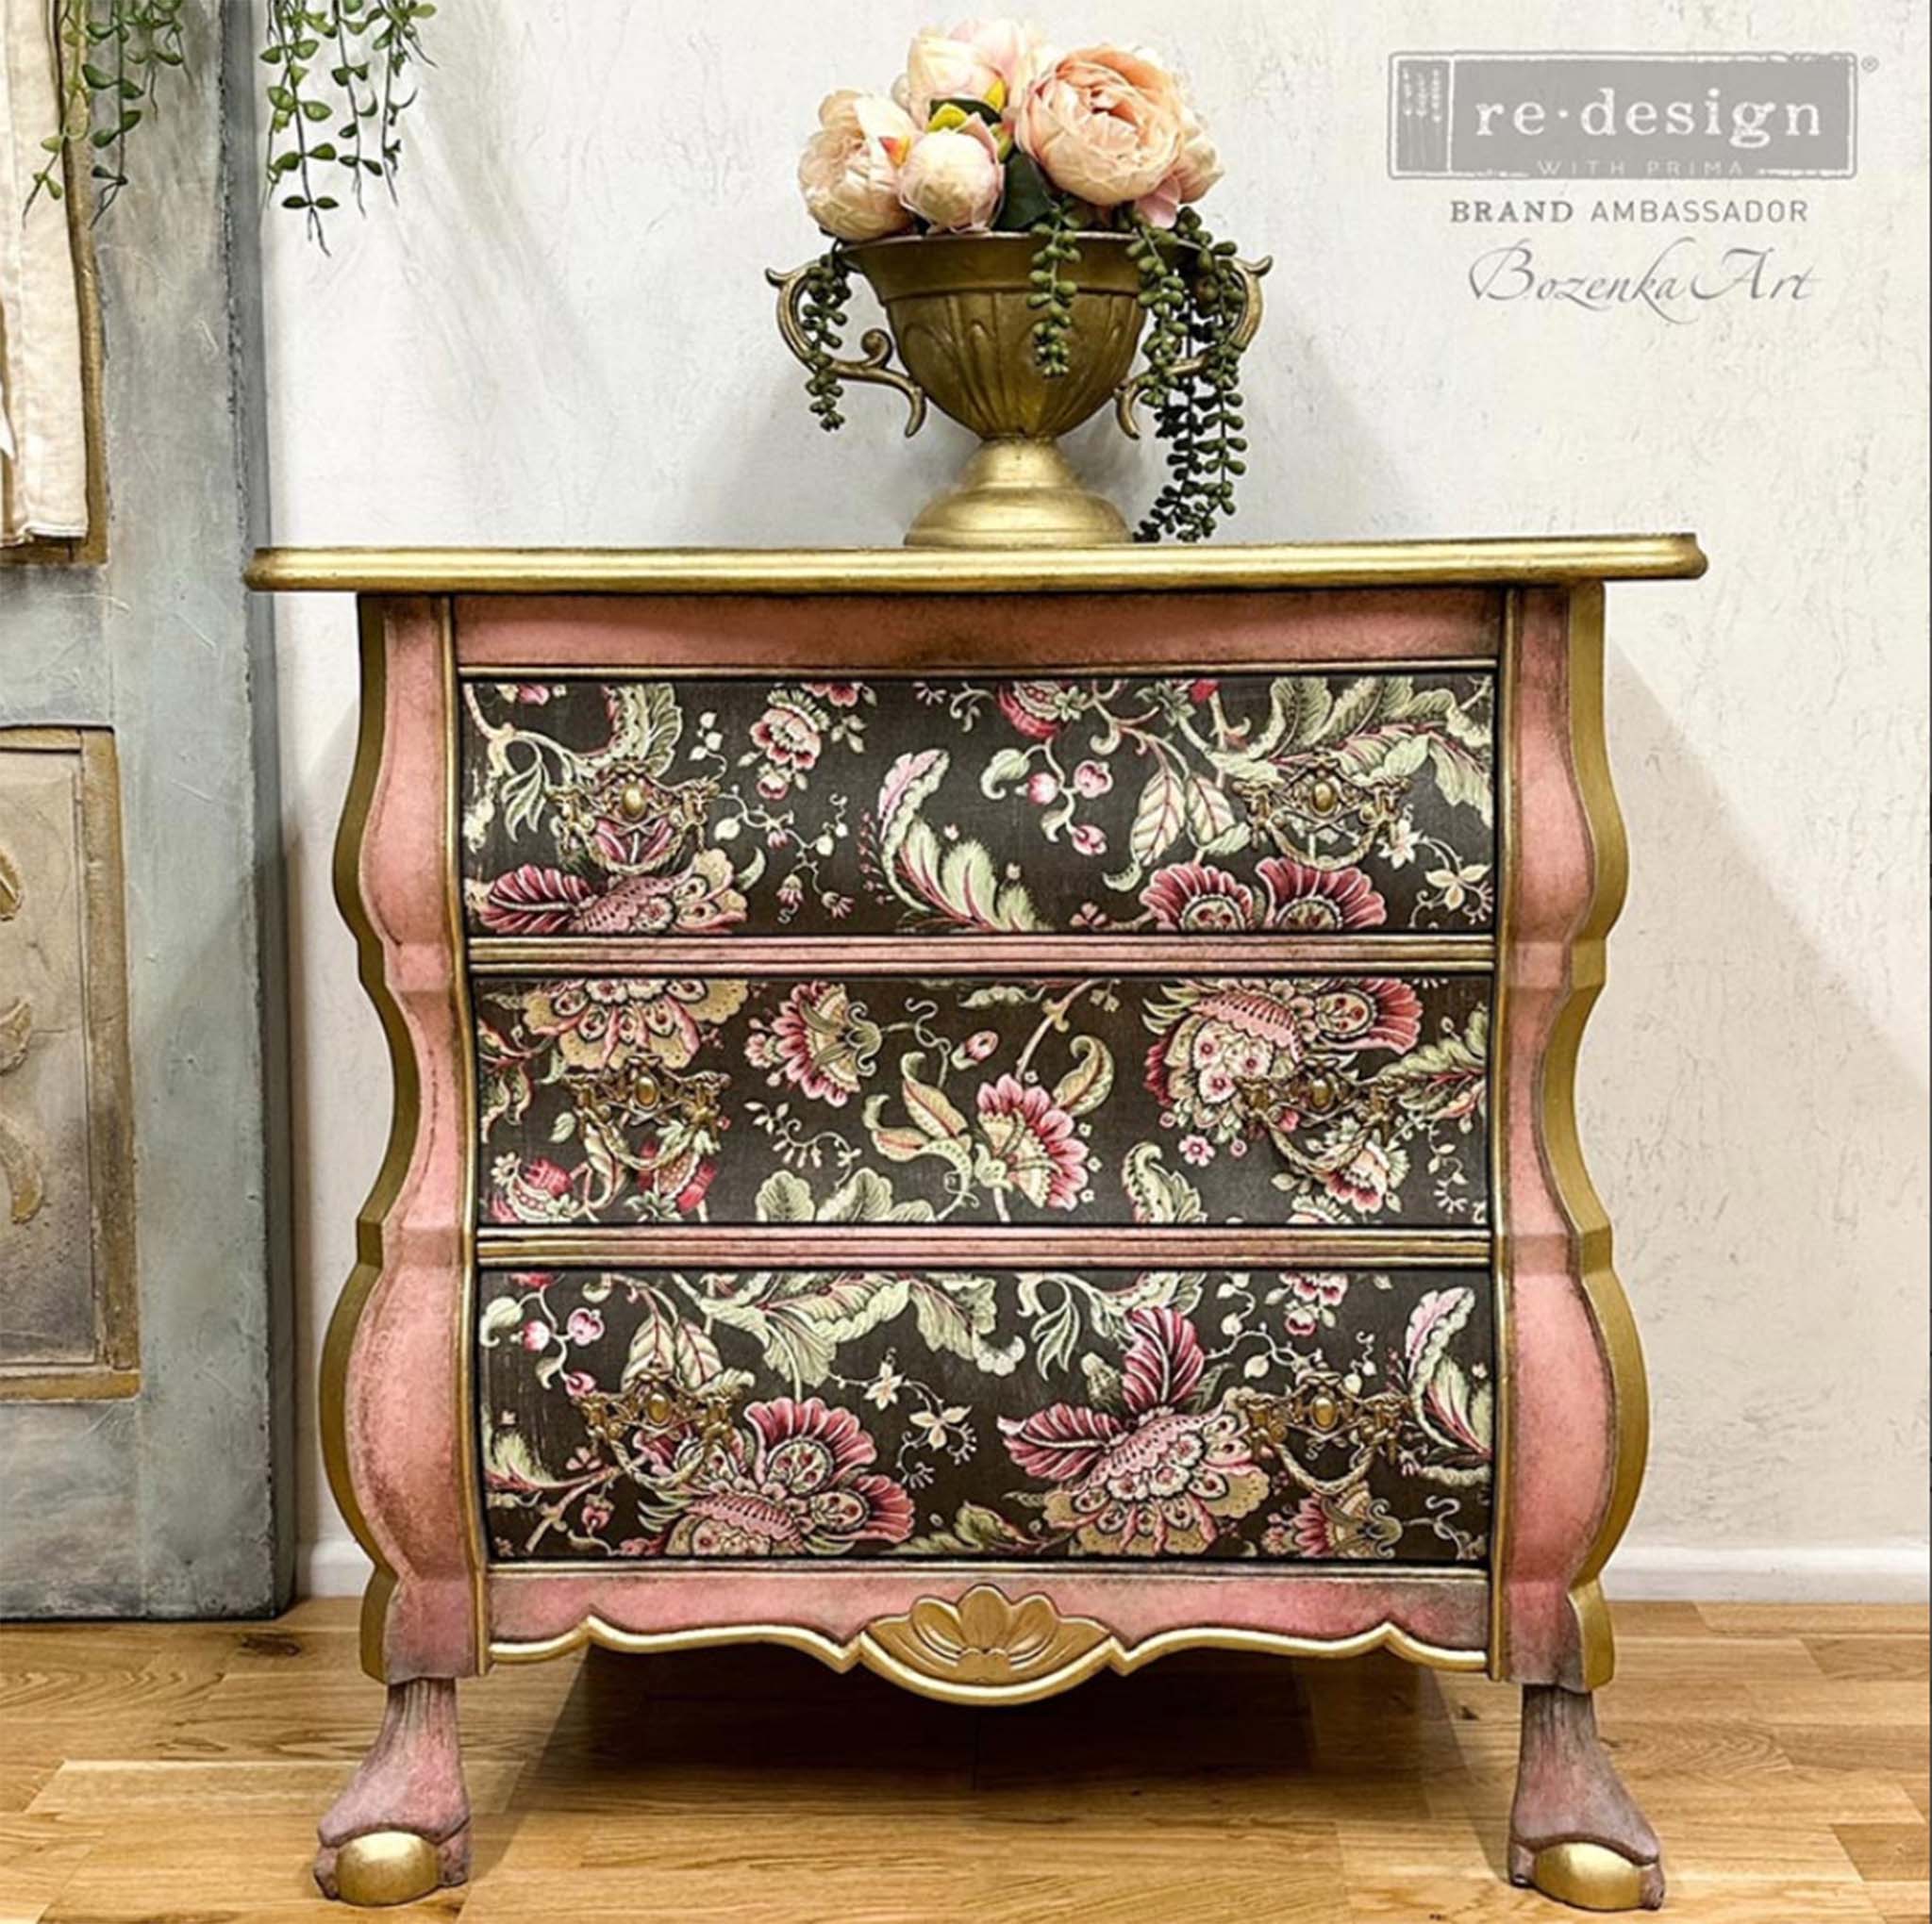 A vintage 3-drawer side table is painted rose gold with gold accents and features Floral Paisley on the drawers. At the top right is a watermark that reads: Bozenka Art. Re-design Brand Ambasador.